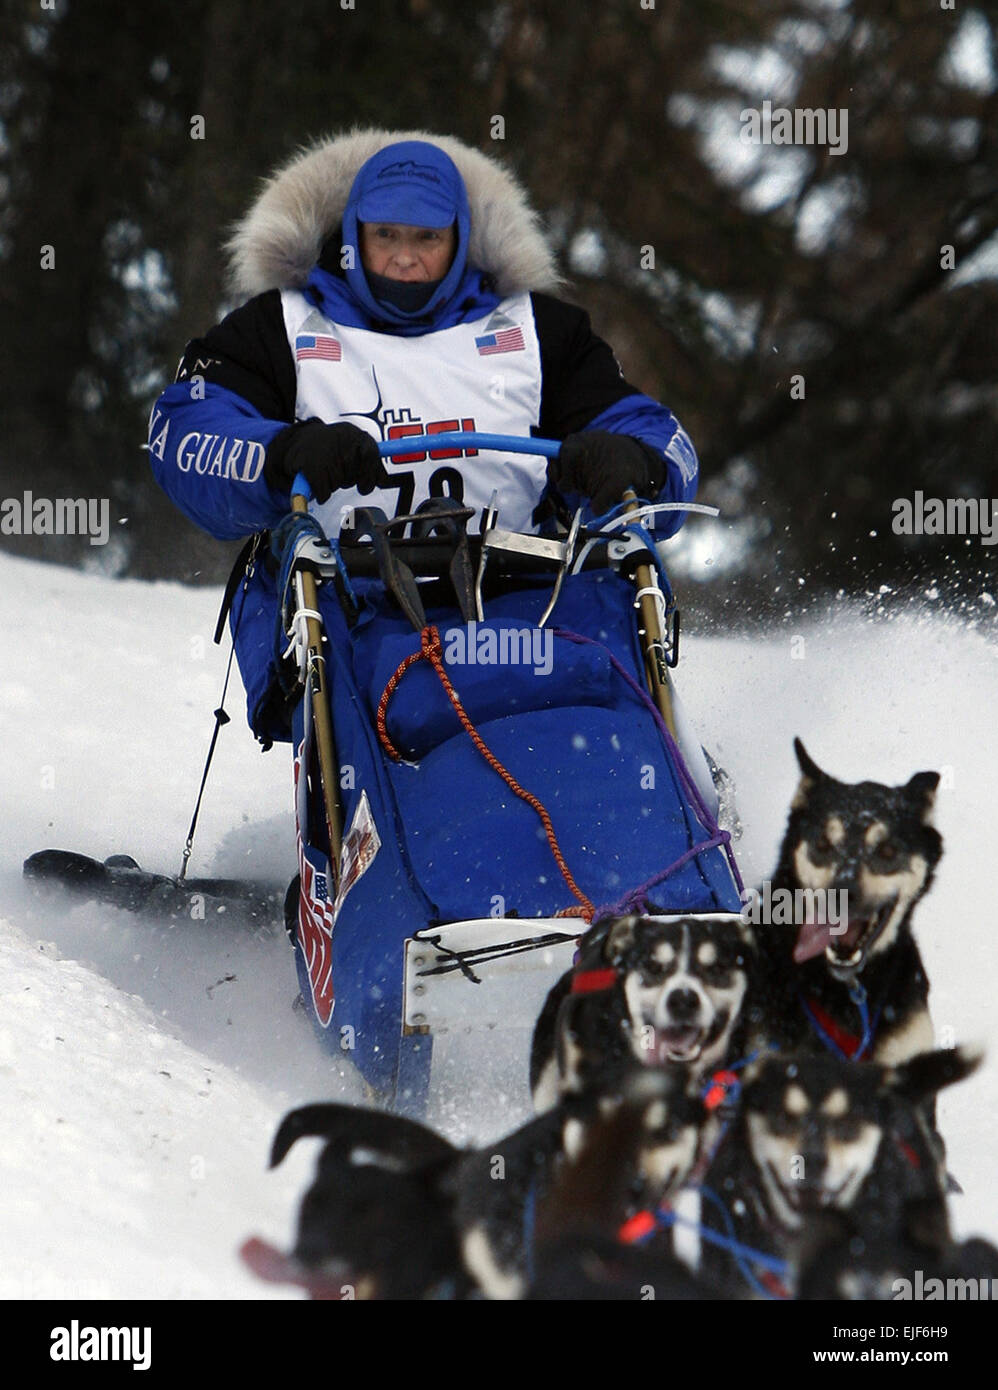 U.S. Army Master Sgt. Rodney Whaley, a Tennessee Army National Guardsman, trains with his dogs March 2, 2008, in Alaska, for the upcoming 2008 Iditarod, billed as 'The World's Last Great Race.'  The two-week dog sled race in Anchorage, Alaska, will take Whaley over frozen rivers, jagged mountain ranges, dense forests, desolate tundra and miles of windswept coast. Whaley, who is being sponsored by the Army National Guard, will become the first Tennessean in history to compete in the race.  Russel Lee Klika Released Stock Photo